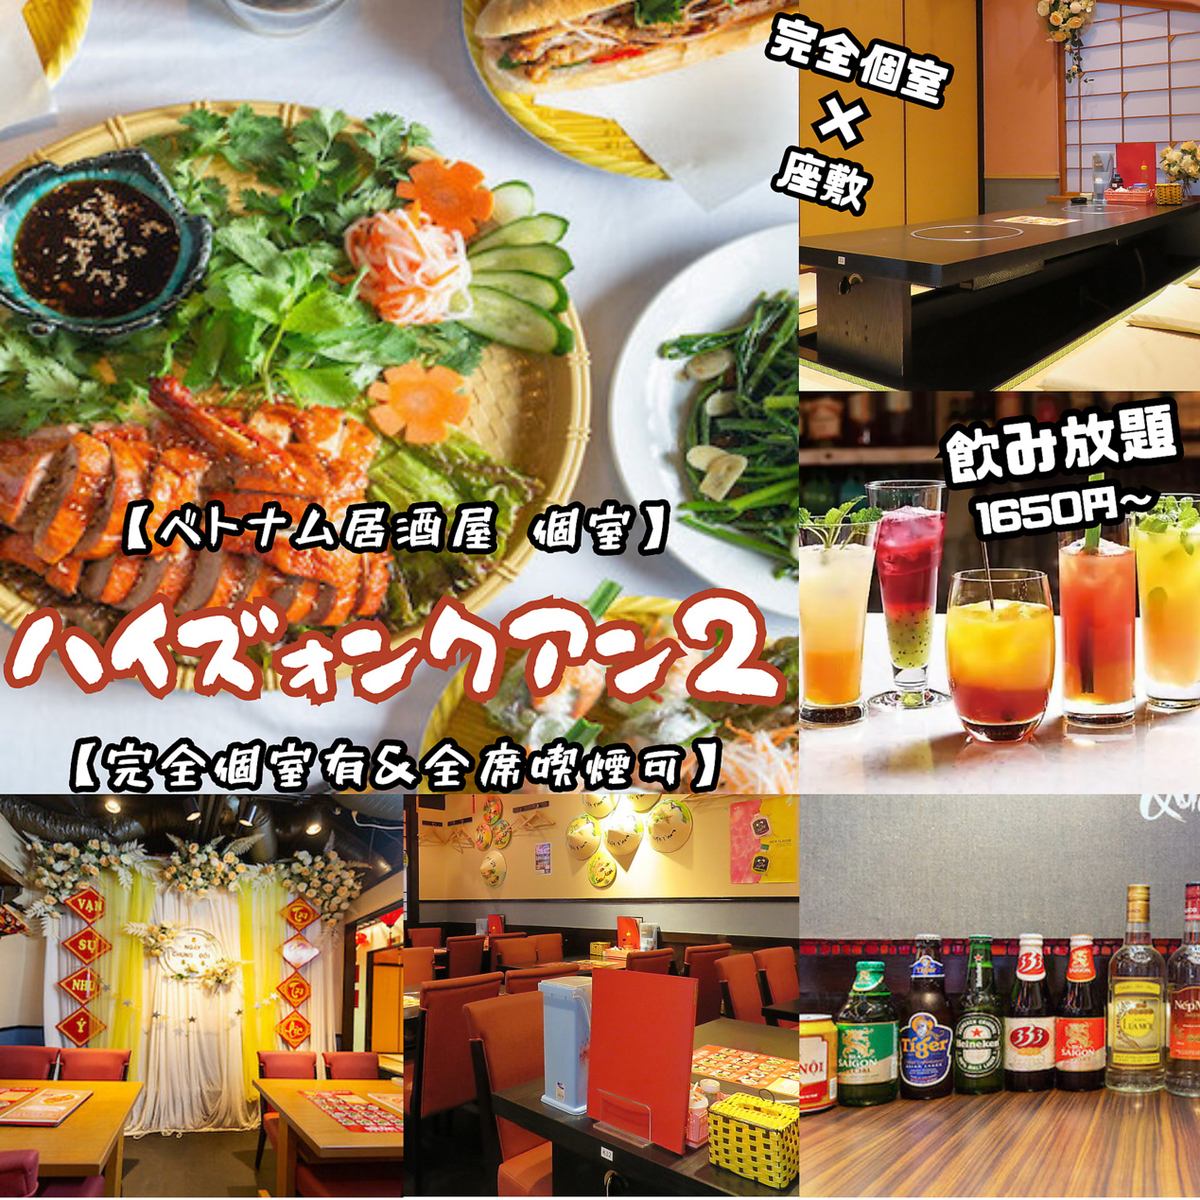 ◆1 minute walk from Yushima Station ◆Private rooms available ◆Authentic Vietnamese cuisine/fresh spring rolls/banh mi/lunch